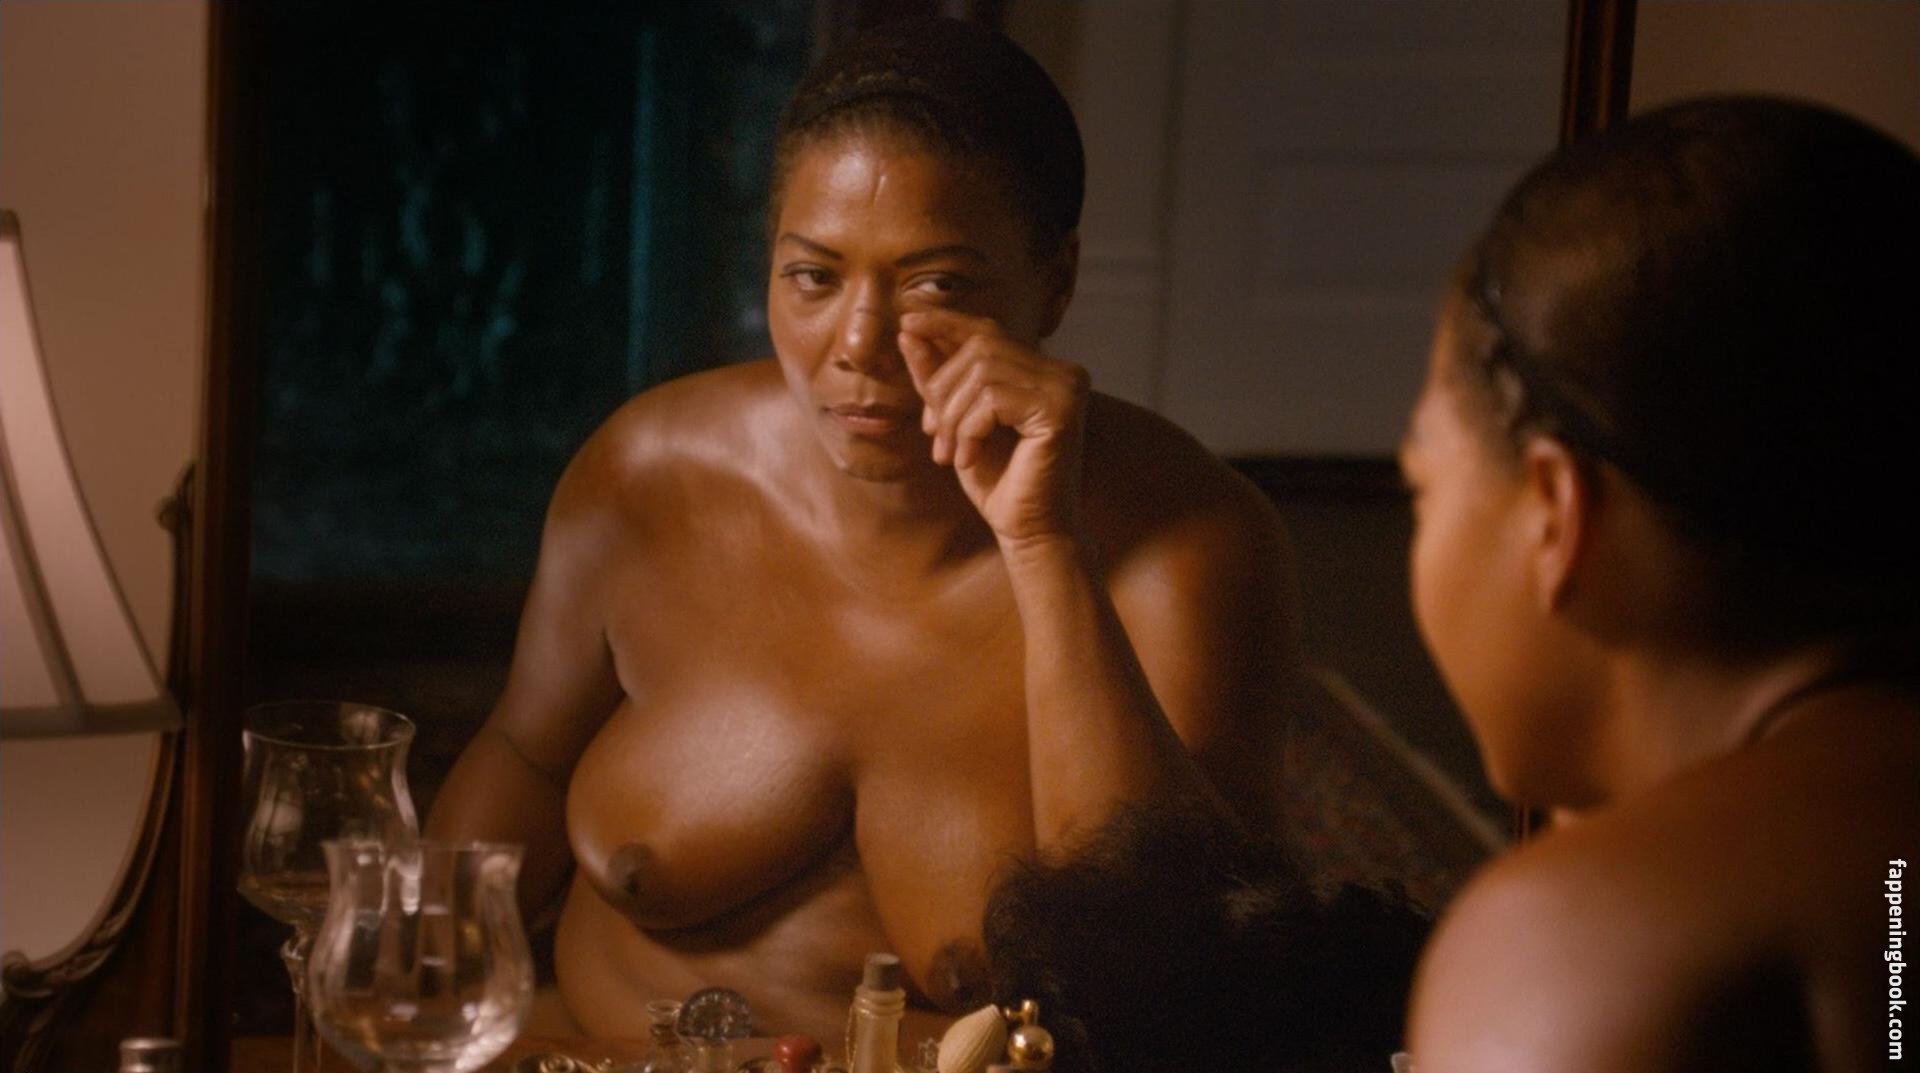 Queen Latifah Nude, The Fappening - Photo #443952 - FappeningBook.